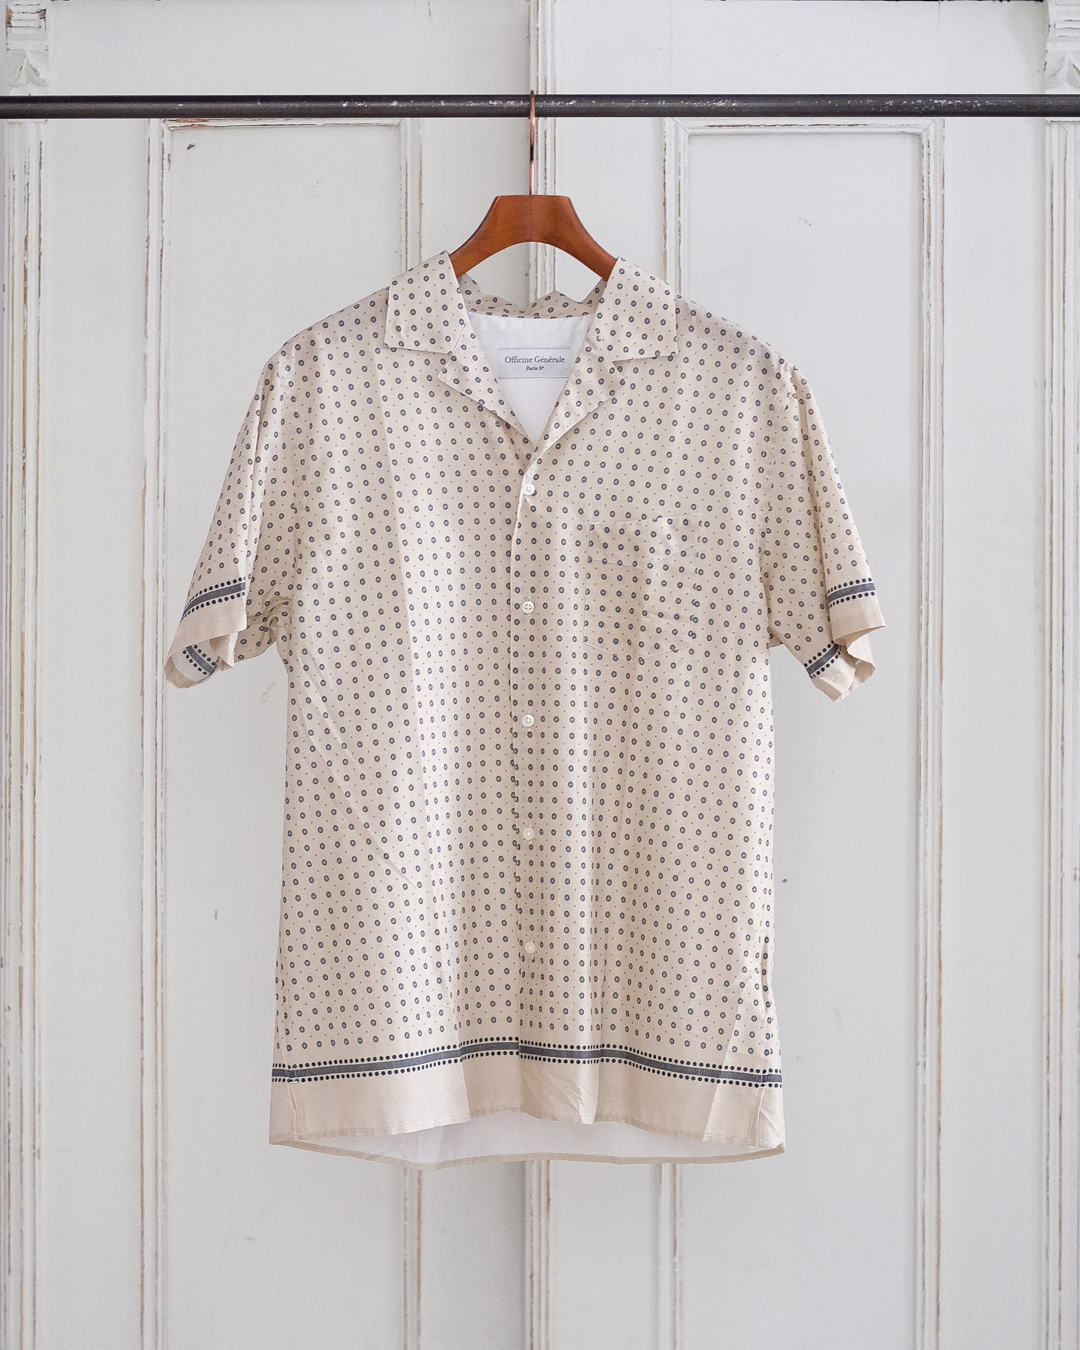 OFFICINE GENERALE” SS20 COLLECTION | MAIDENS SHOP | メイデンズショップ